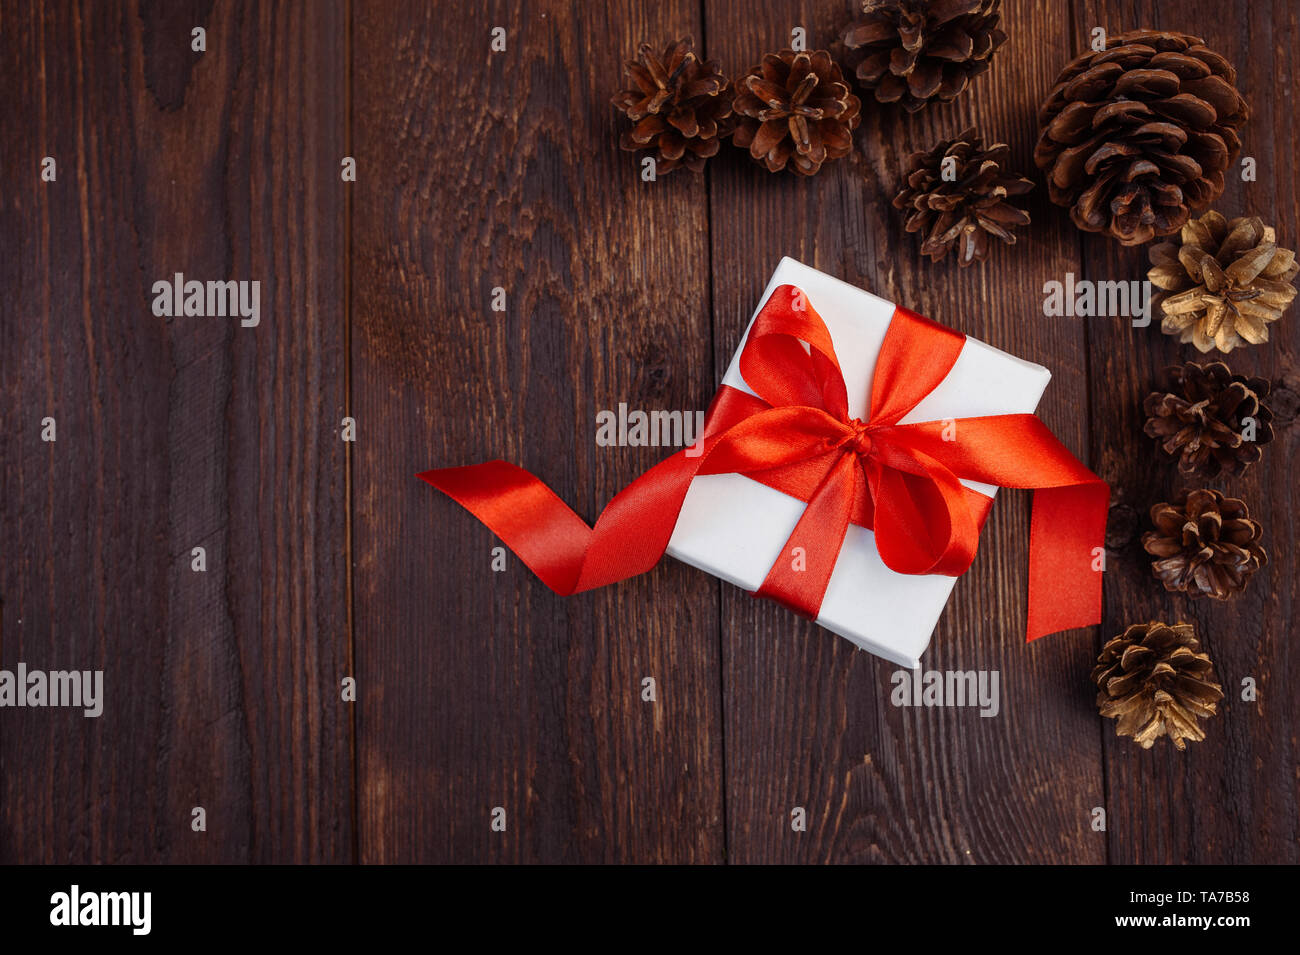 Christmas greetings card. White gift box with red ribbon and bumps on a wooden background with place for your text Stock Photo